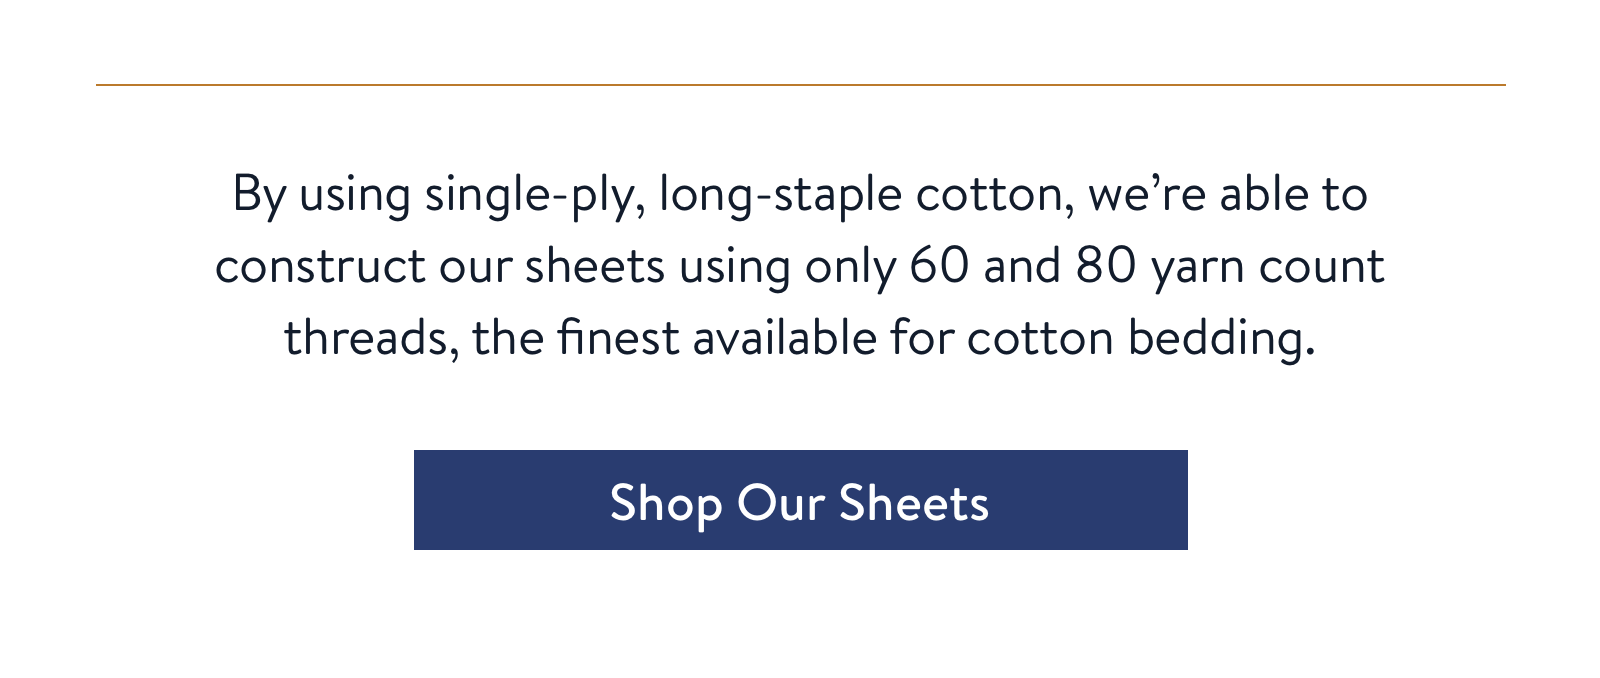 By using single-ply, long-staple cotton, we're able to construct our sheets using only 60 and 80 yarn count threads, the finest available for cotton bedding.